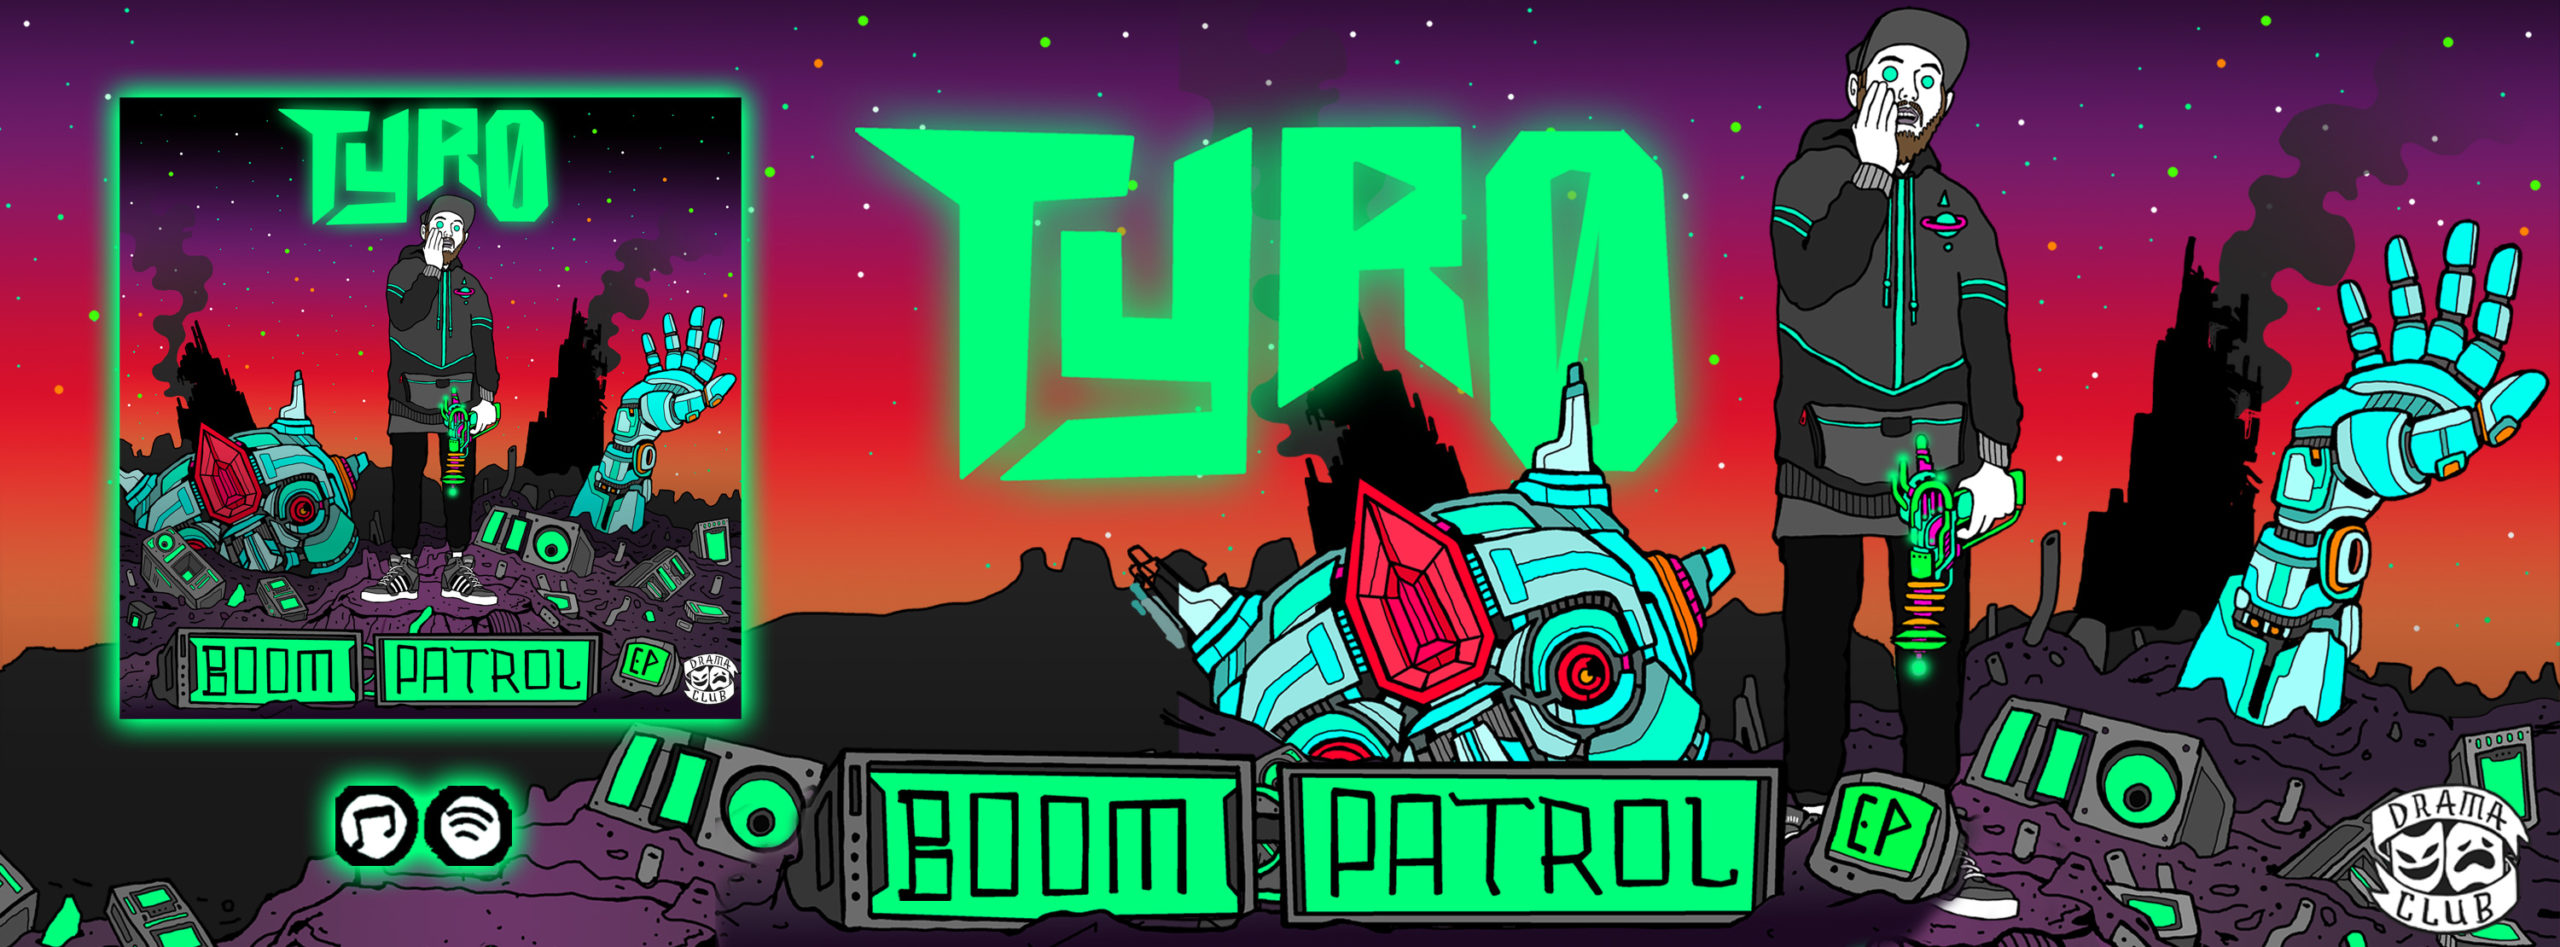 Boom Patrol EP is out now!